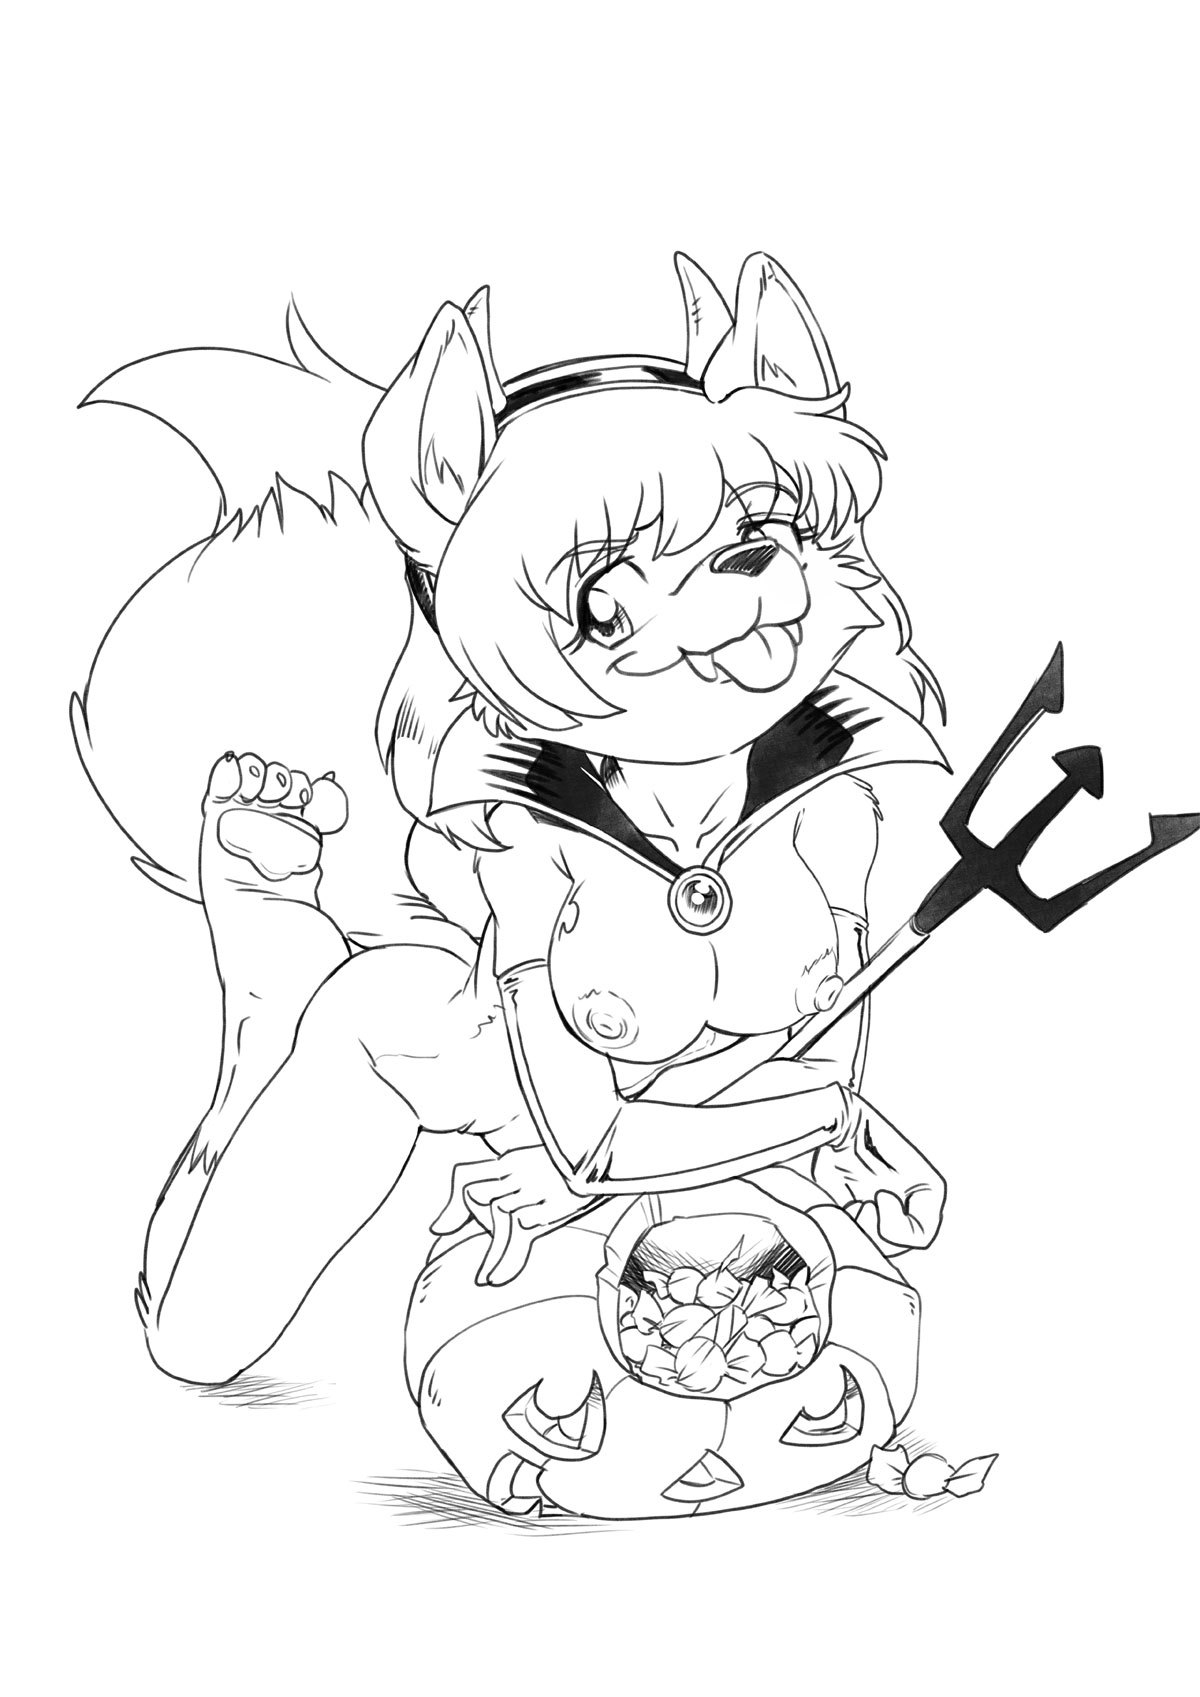 Foxy HalloweenSketch Stream Commission for Vixen Defeas of their Kris getting her